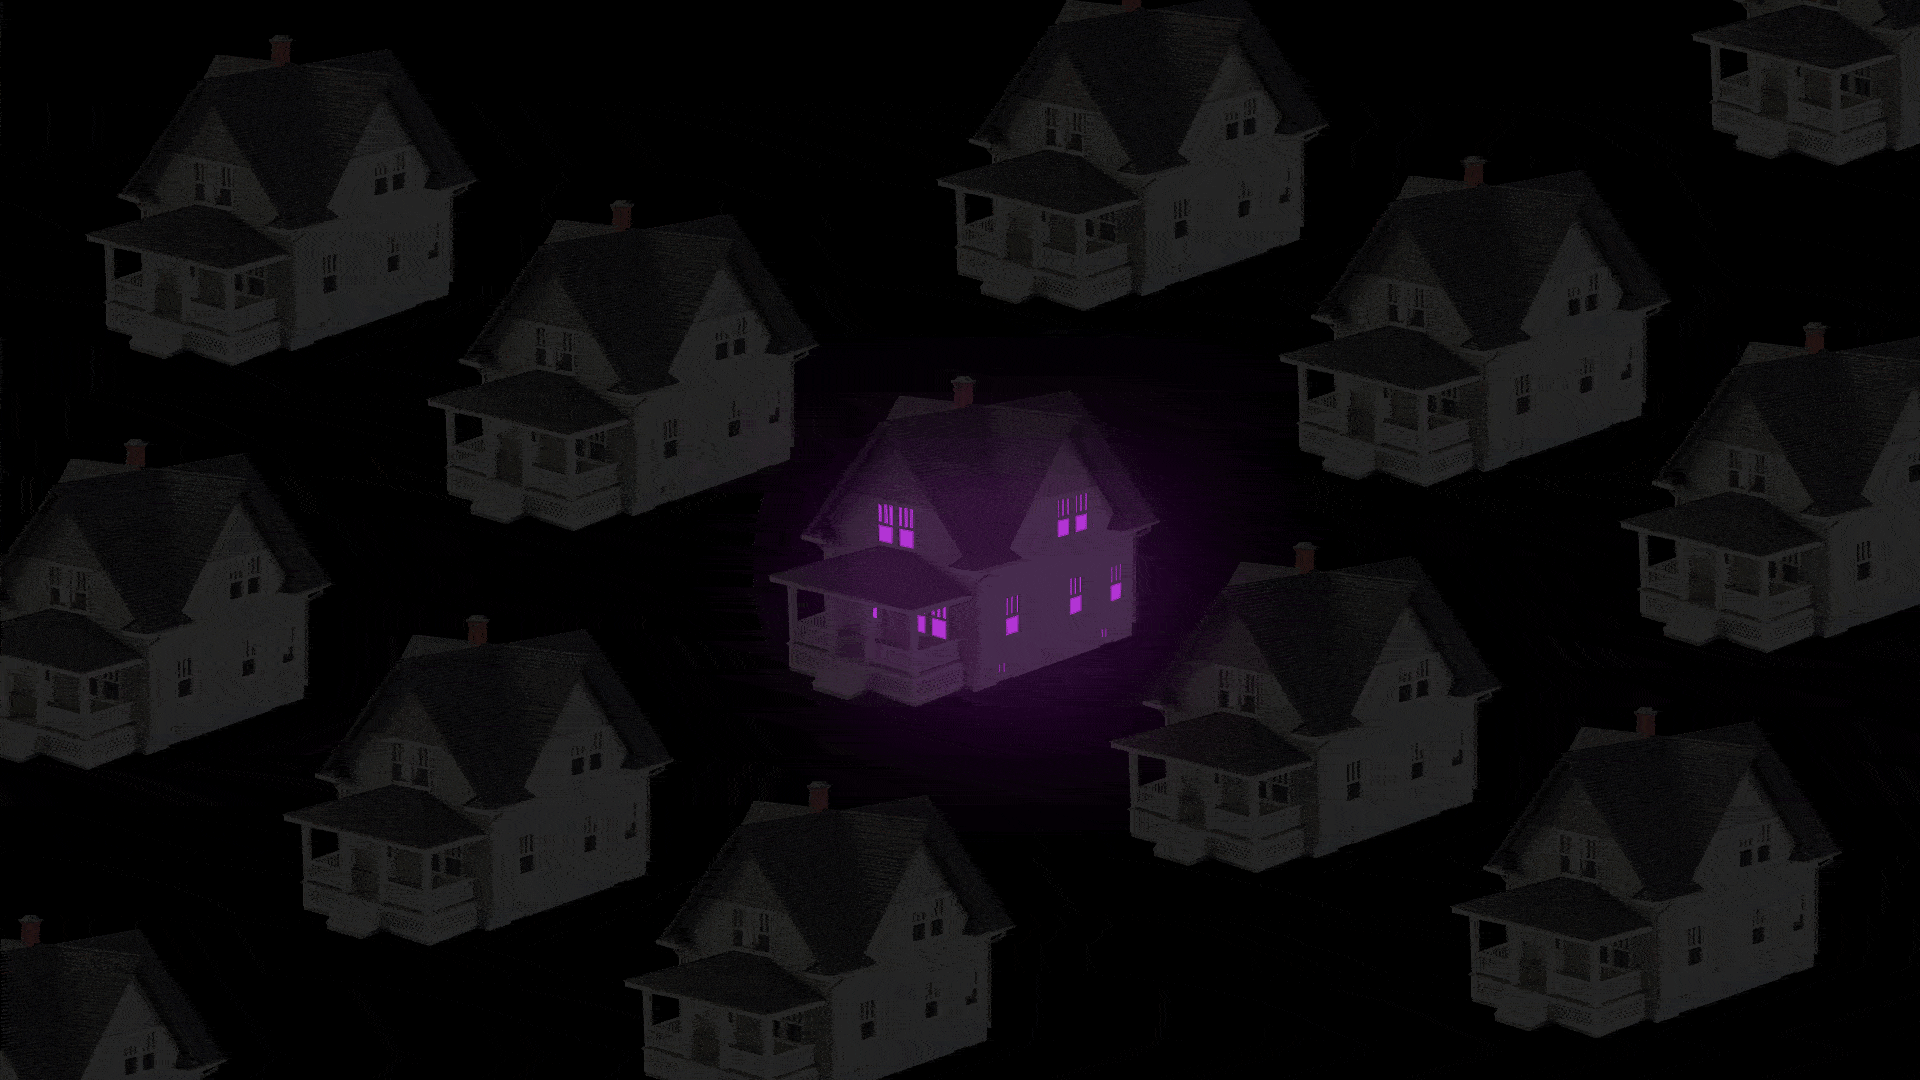 Animated illustration of a neighborhood at night with the house in the center showing flashing colored lights.